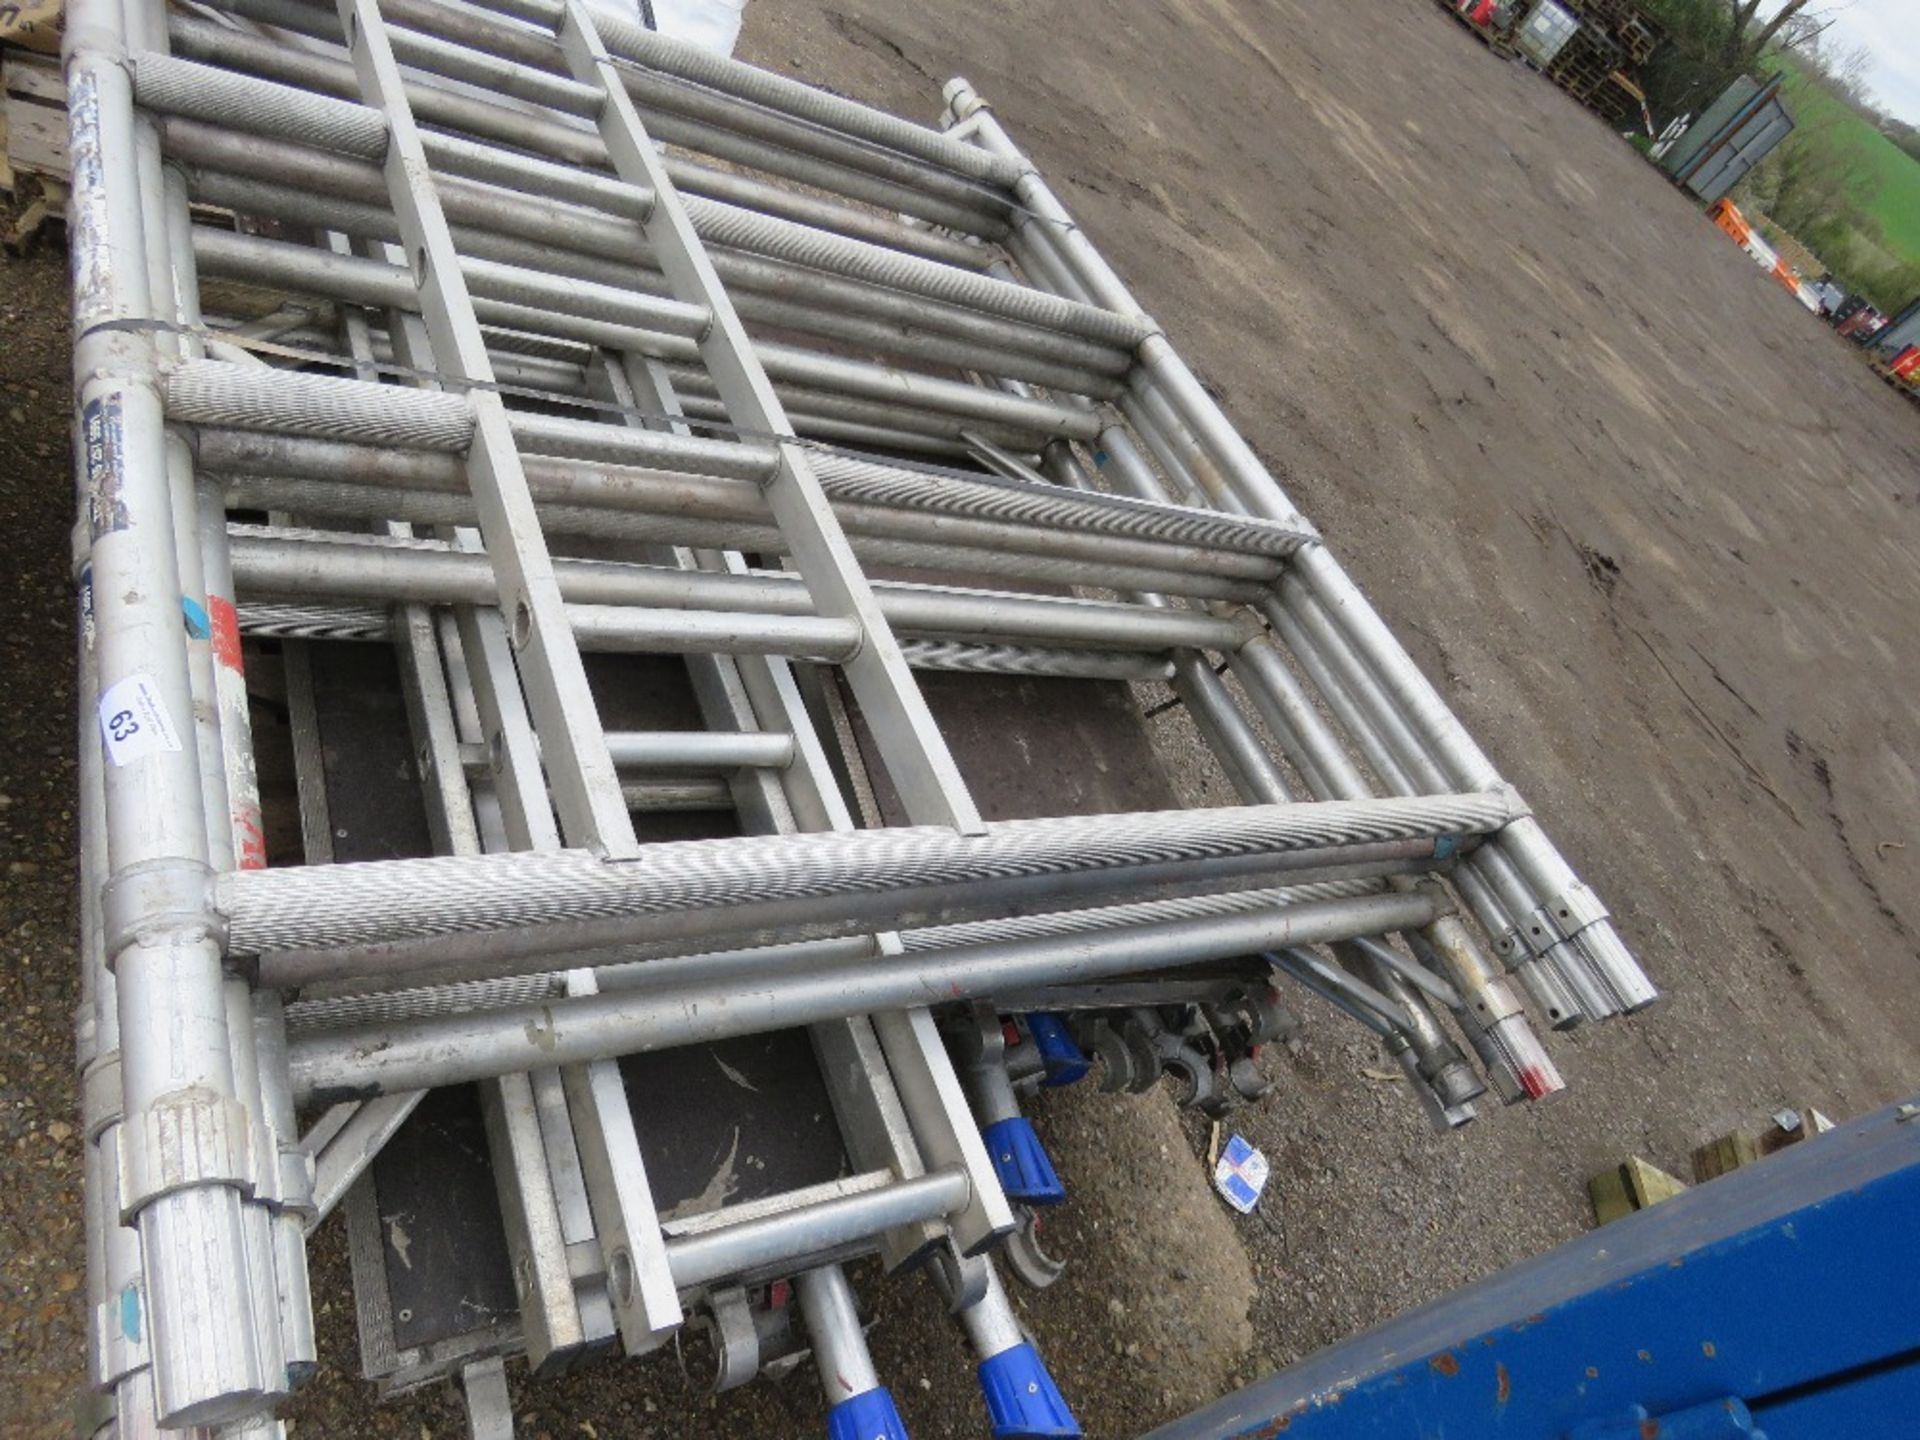 LEWIS ALUMINIUM SCAFFOLD TOWER PARTS INCLUDING FRAMES, BEAMS, LEGS AND BOARDS. - Image 2 of 4